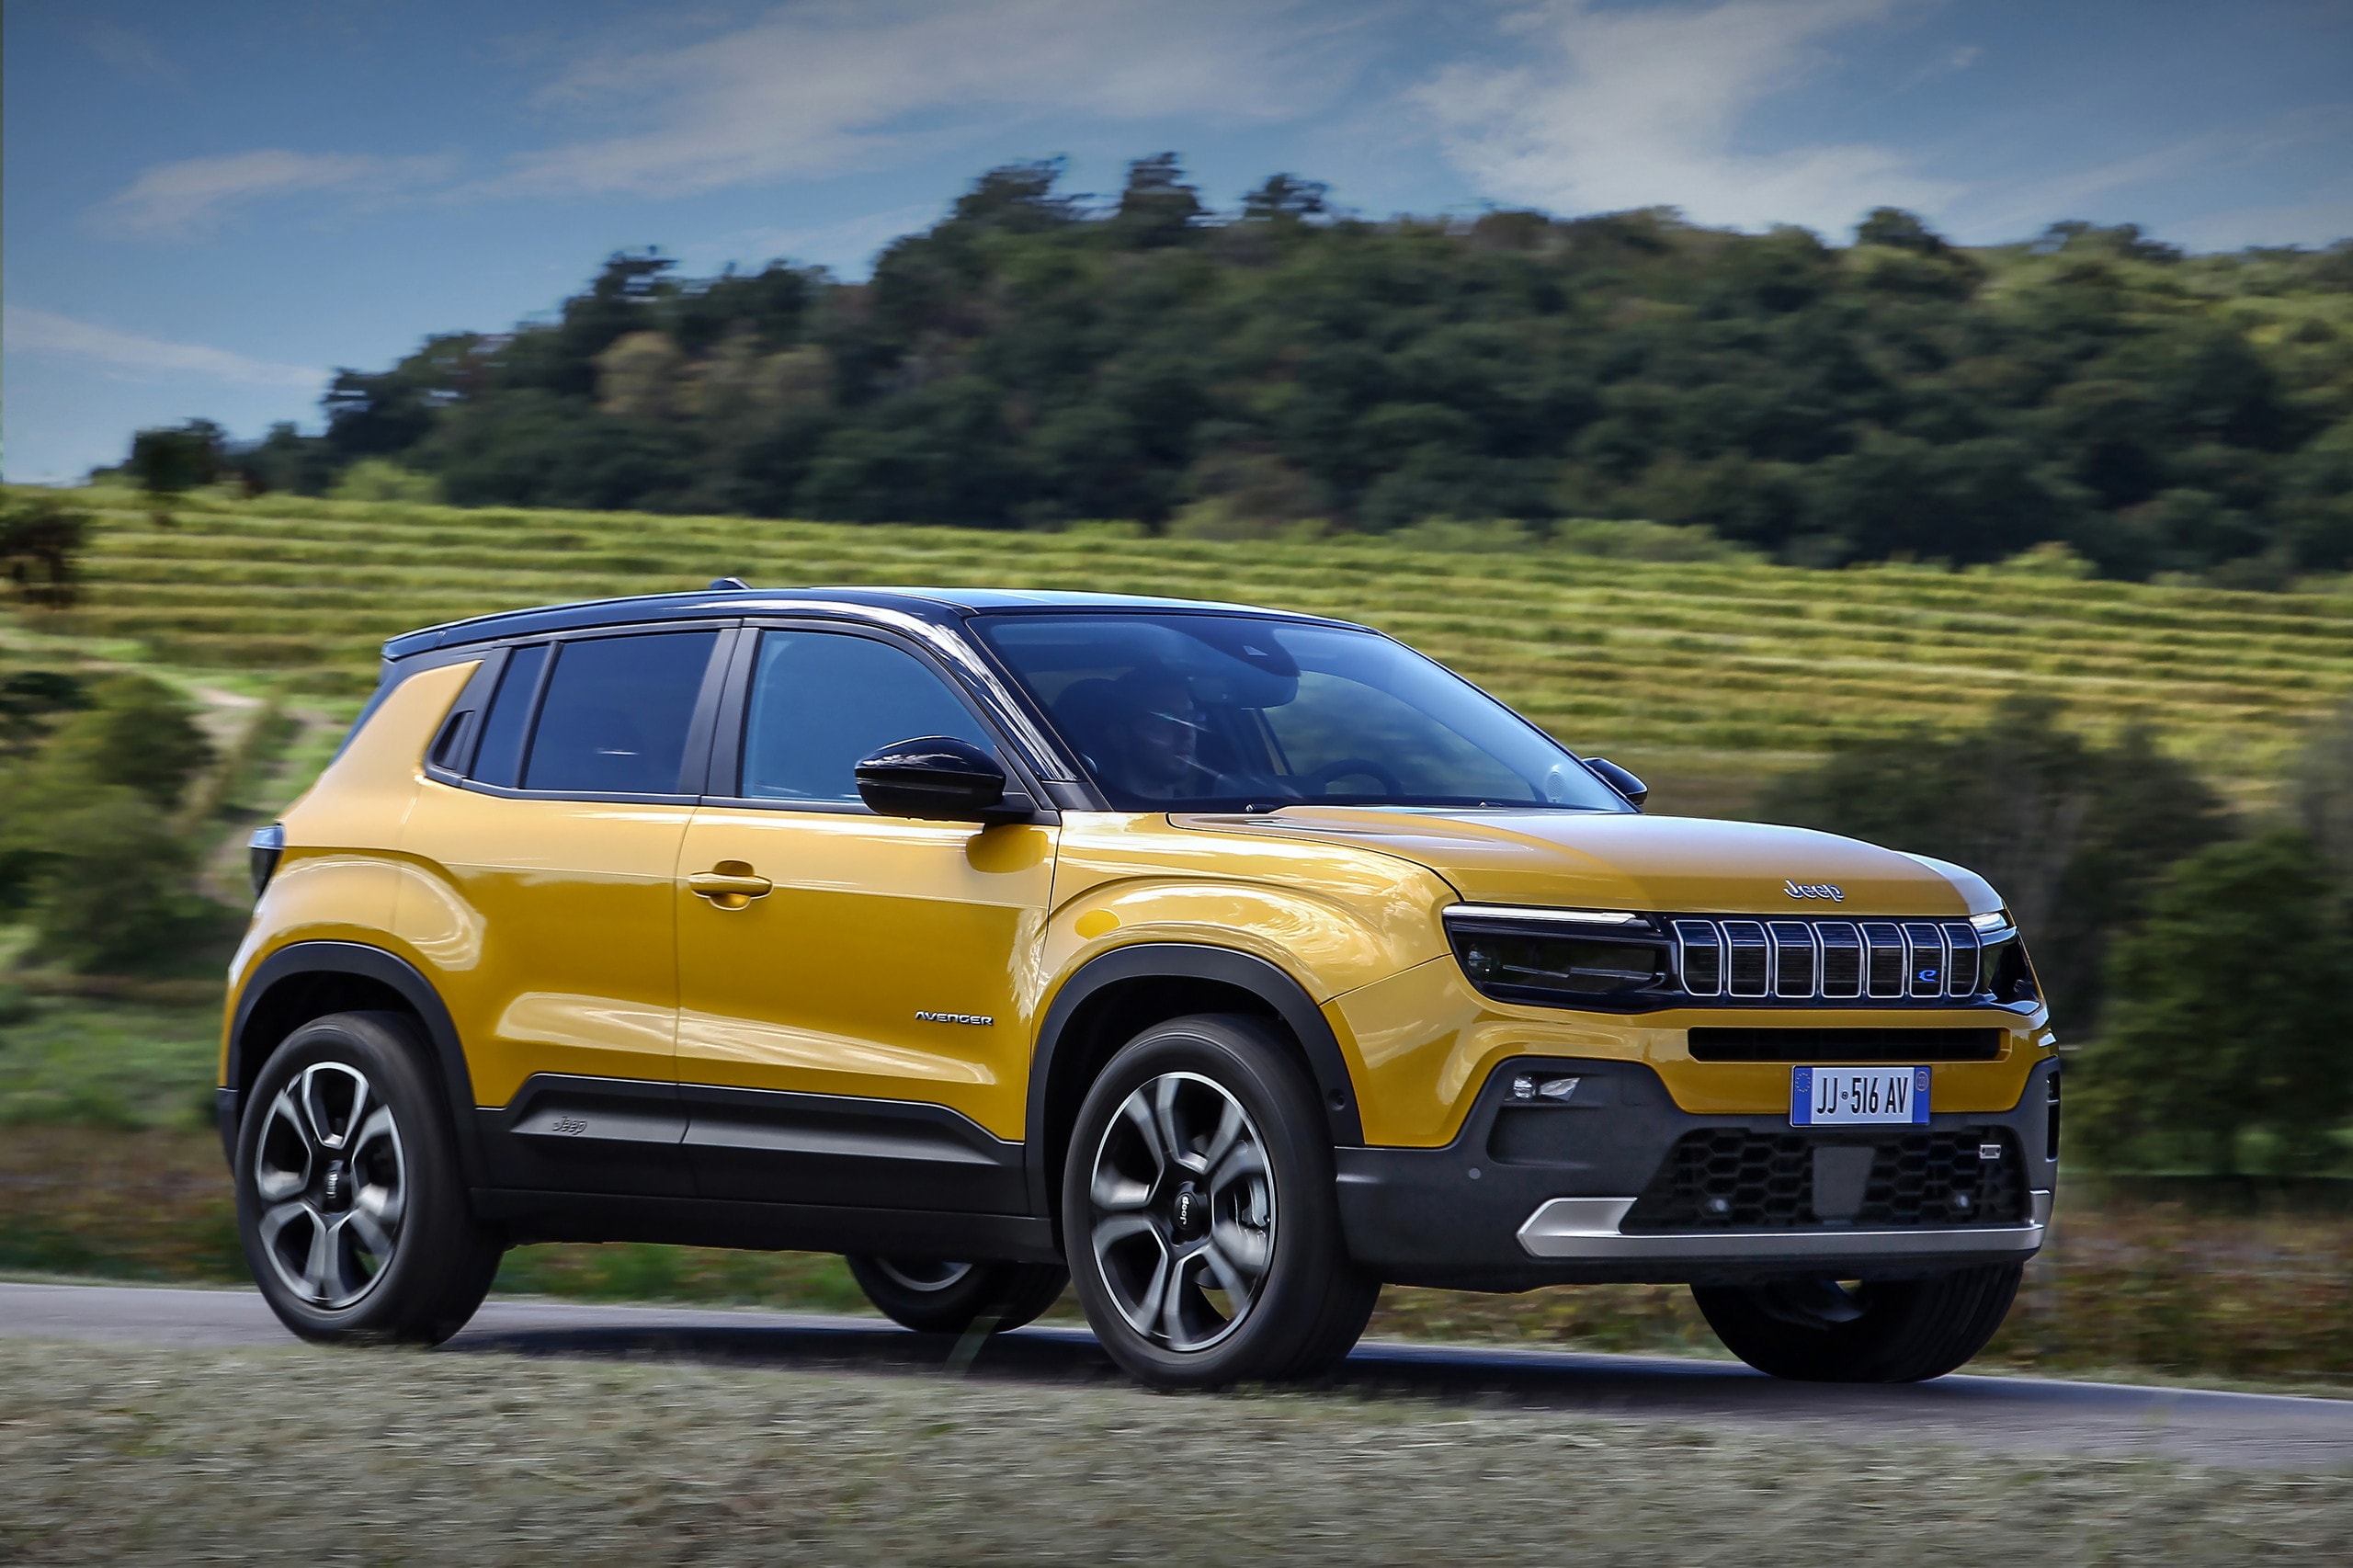 2023 Jeep Avenger Orders Open In Europe With €39,500 1st Edition